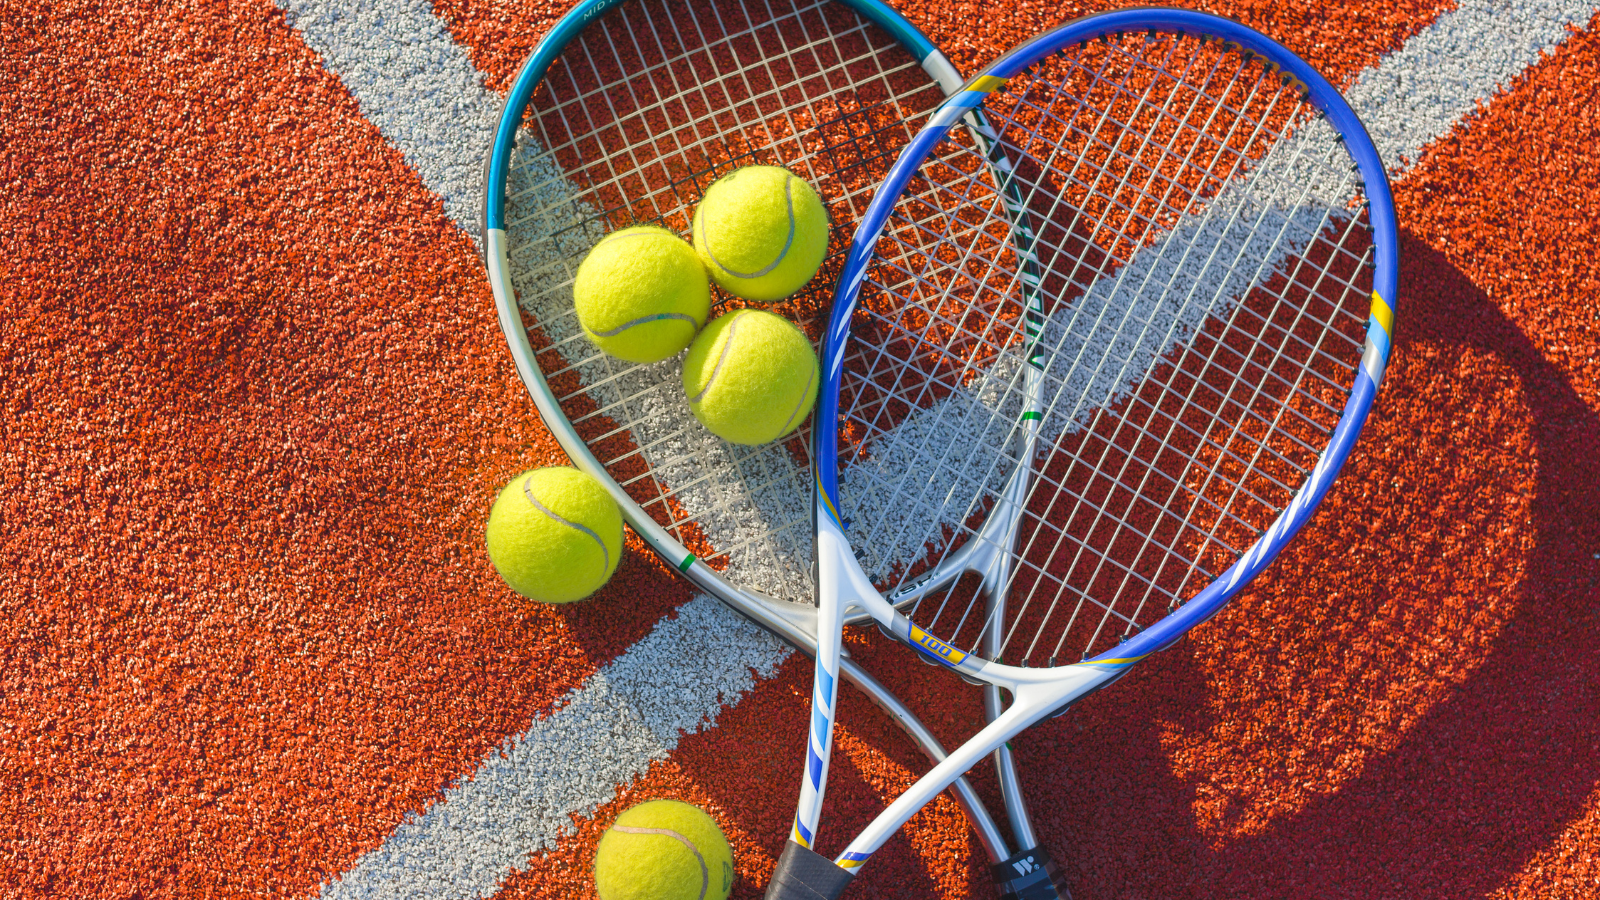 Tennis Fitness Secrets: Smart Insights on Building Endurance and Agility for the Court